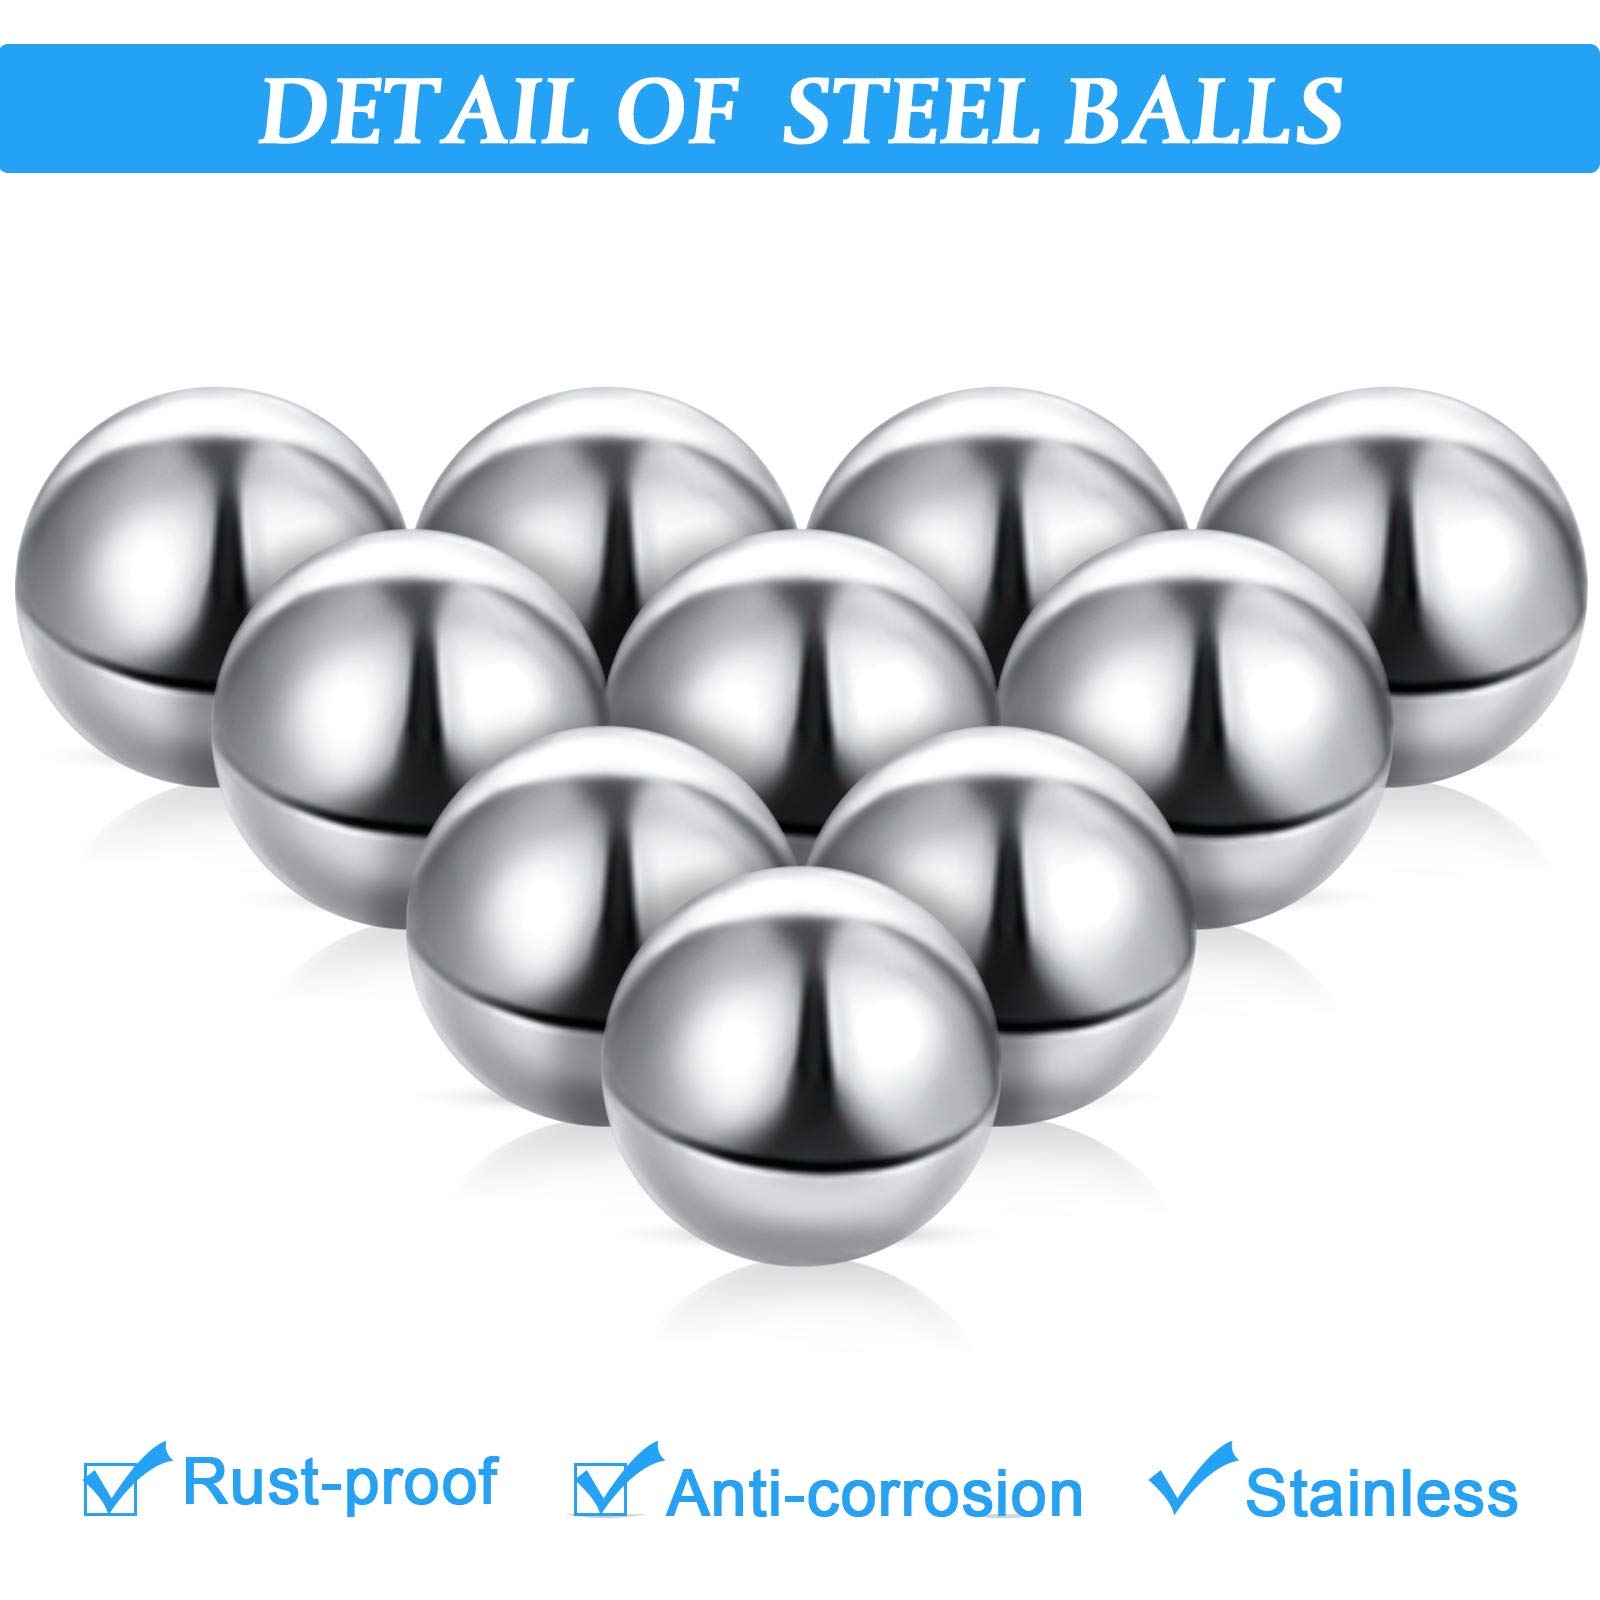 30 Pieces Labyrinth Replacement Steel Balls 0.5 Inch Replacement Balls Rust-Proof Metal Balls for Marble Runs